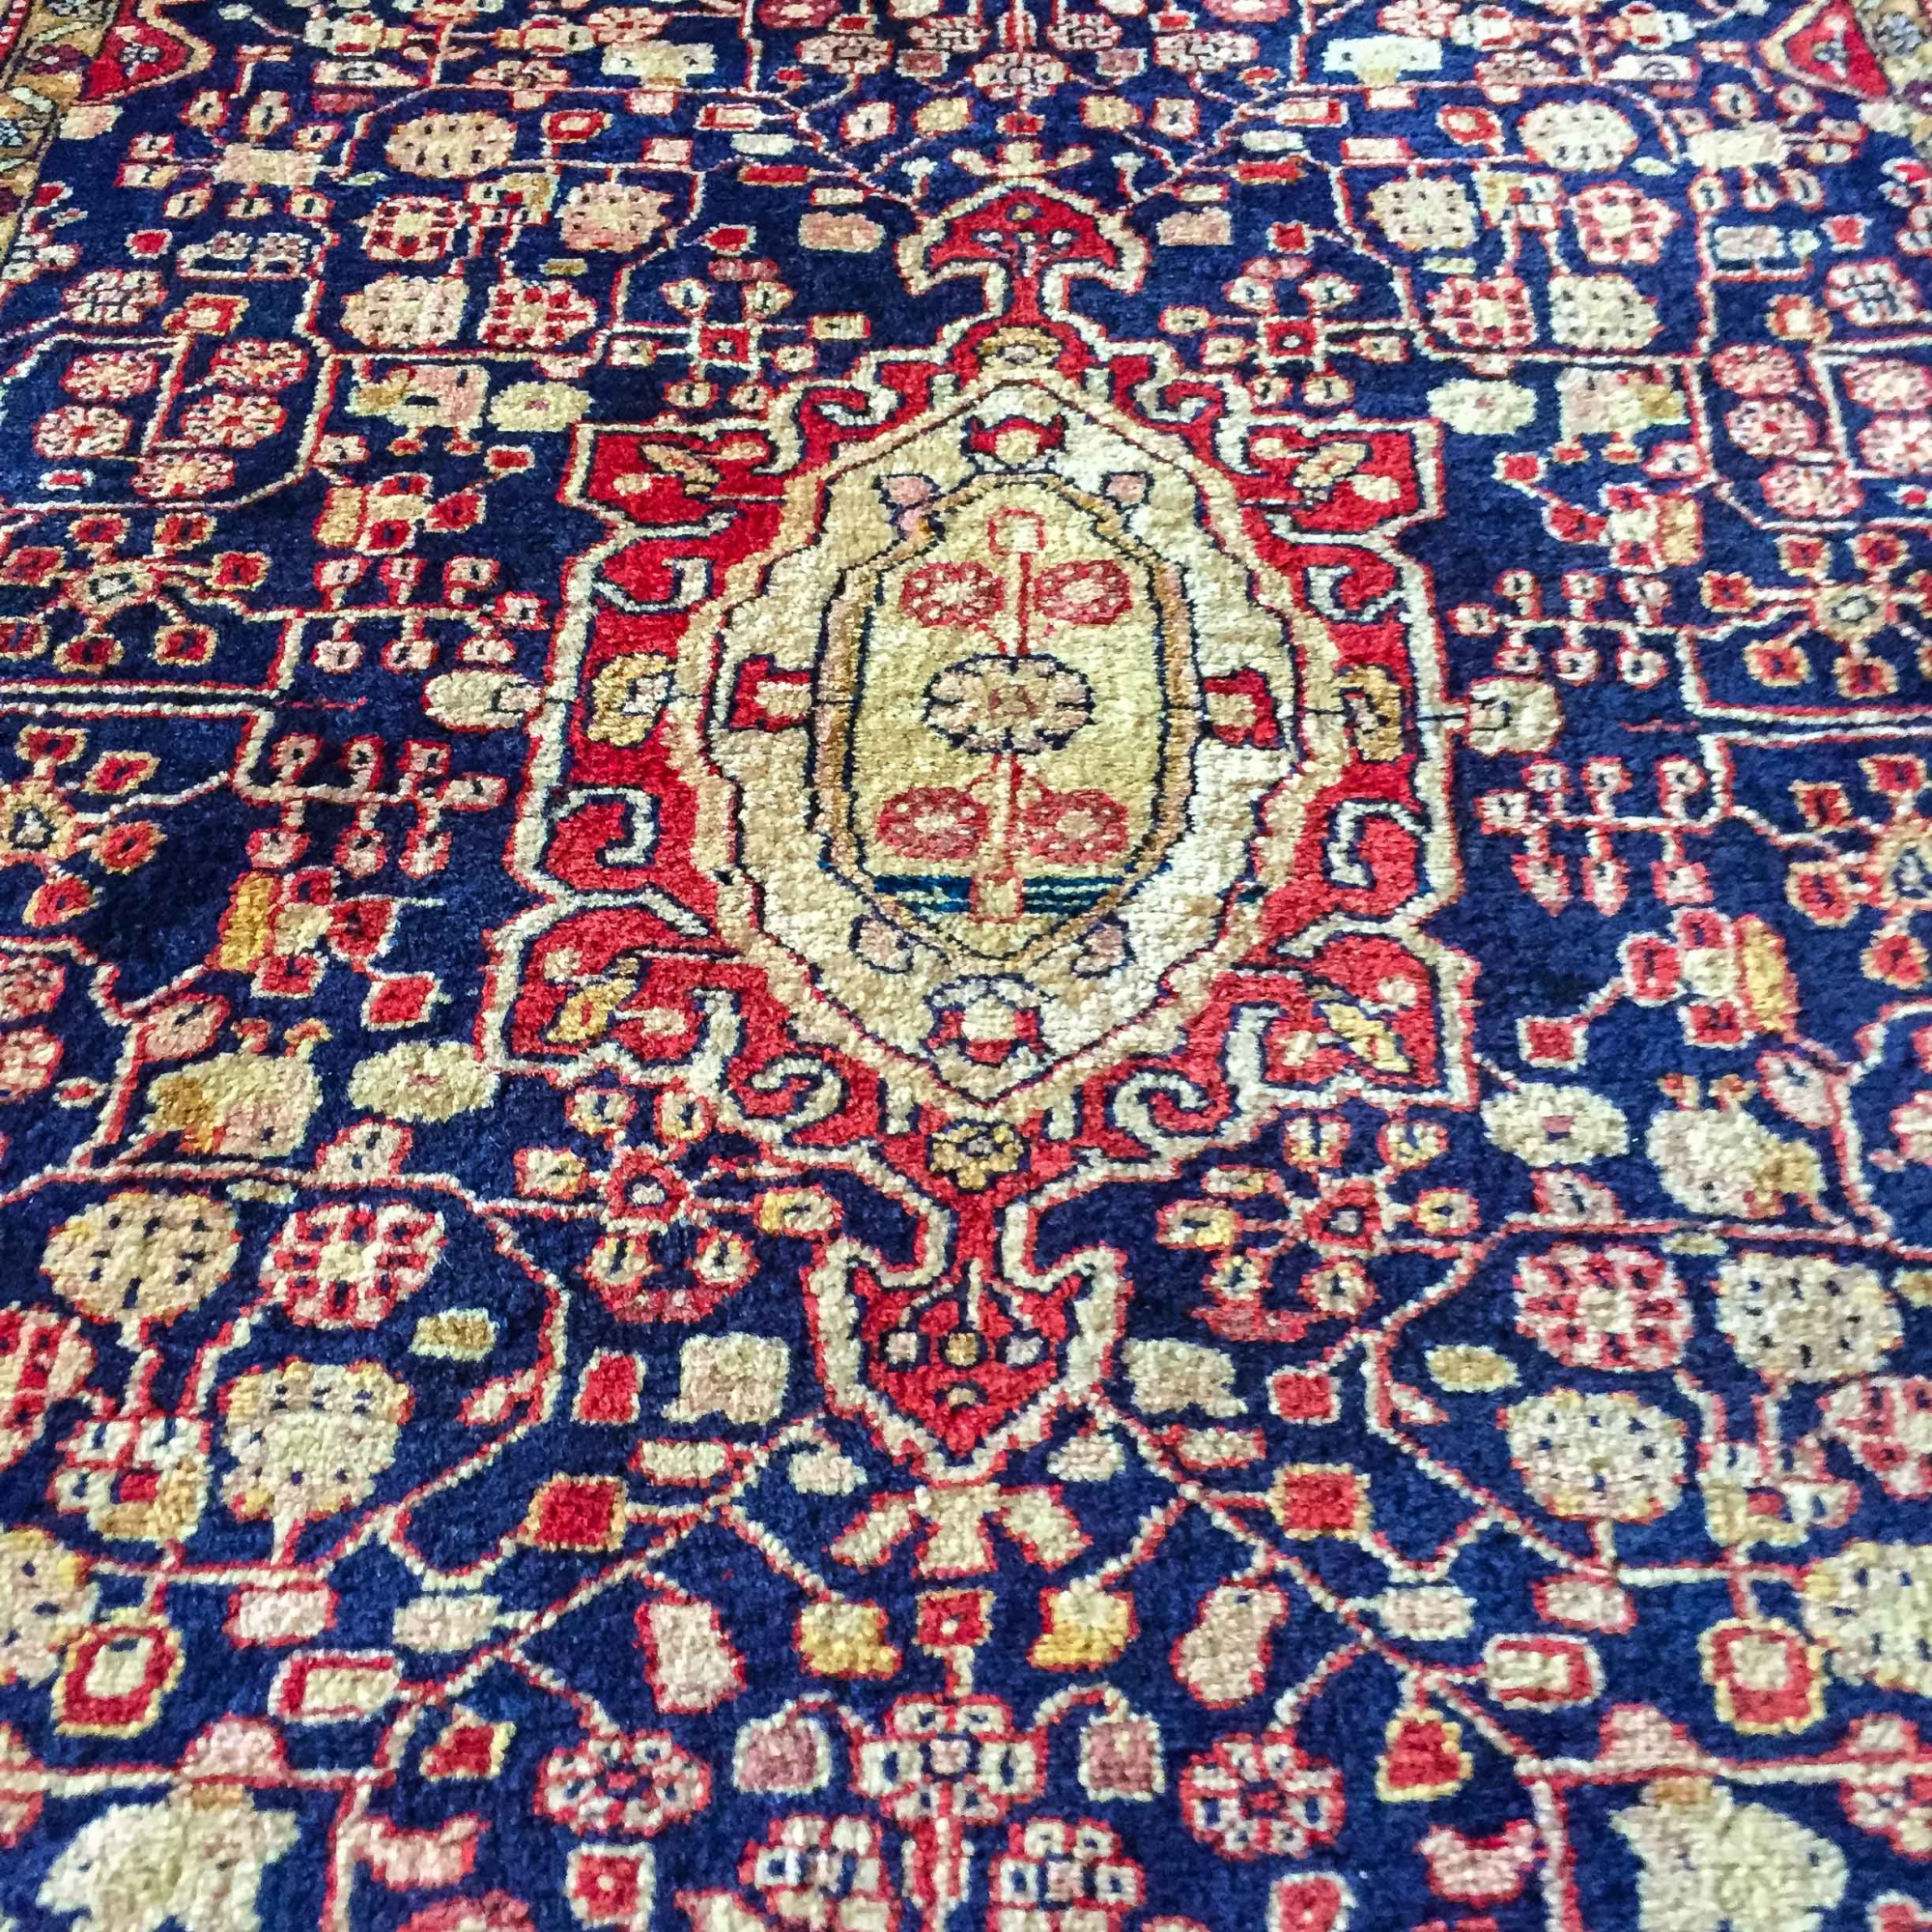 Malayer Hand Knotted Rug 3'6